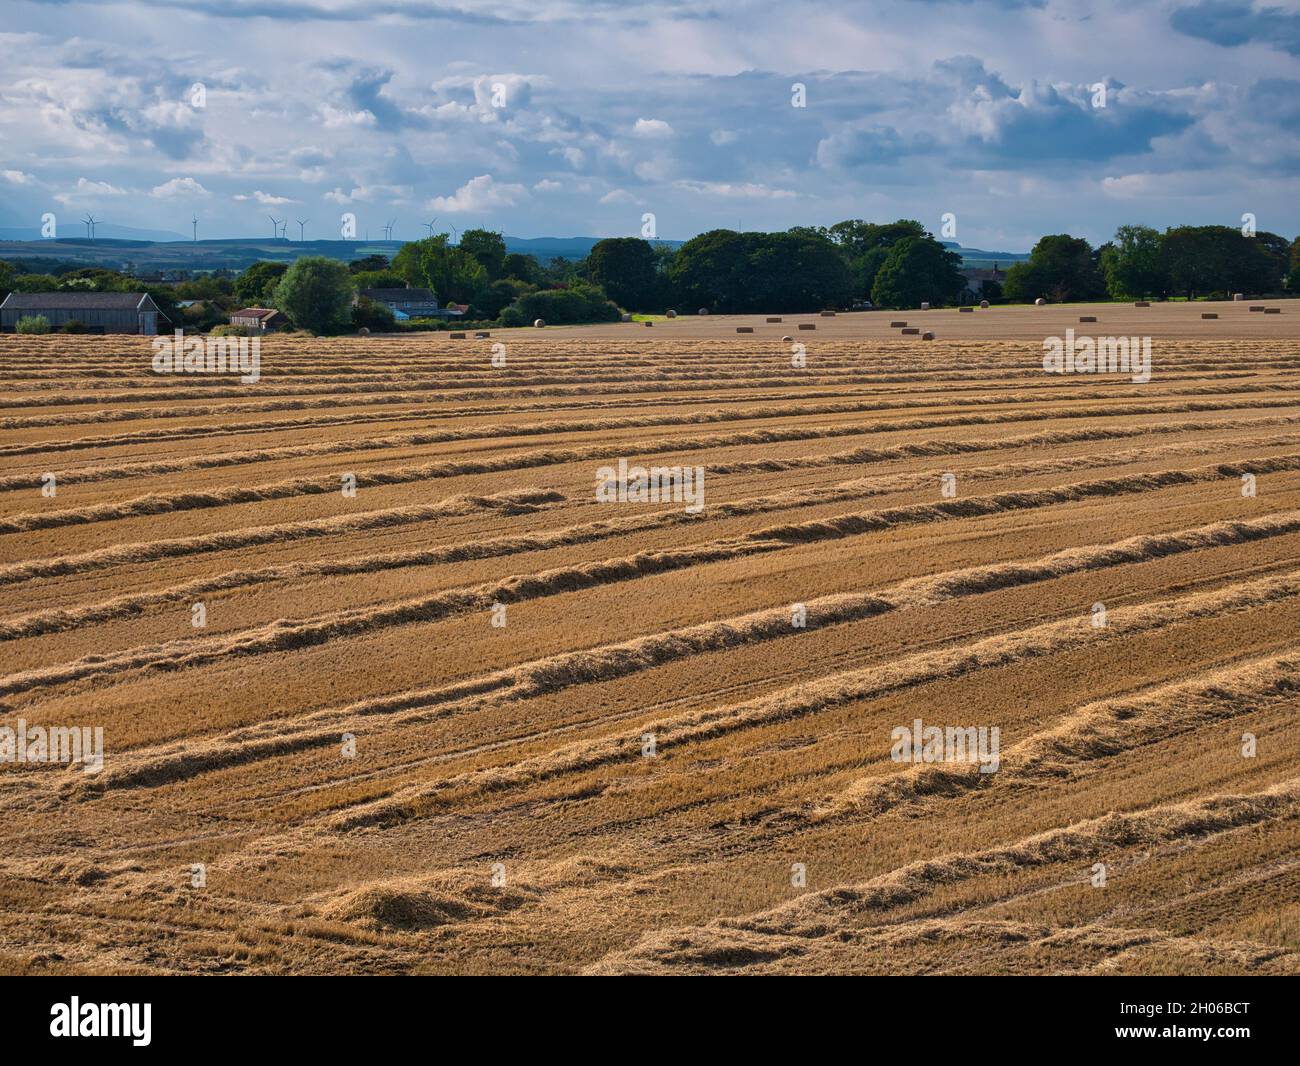 Rows of straw in an arable field in Northumberland, England, UK. Taken on a sunny, autumn day during harvest time. Stock Photo